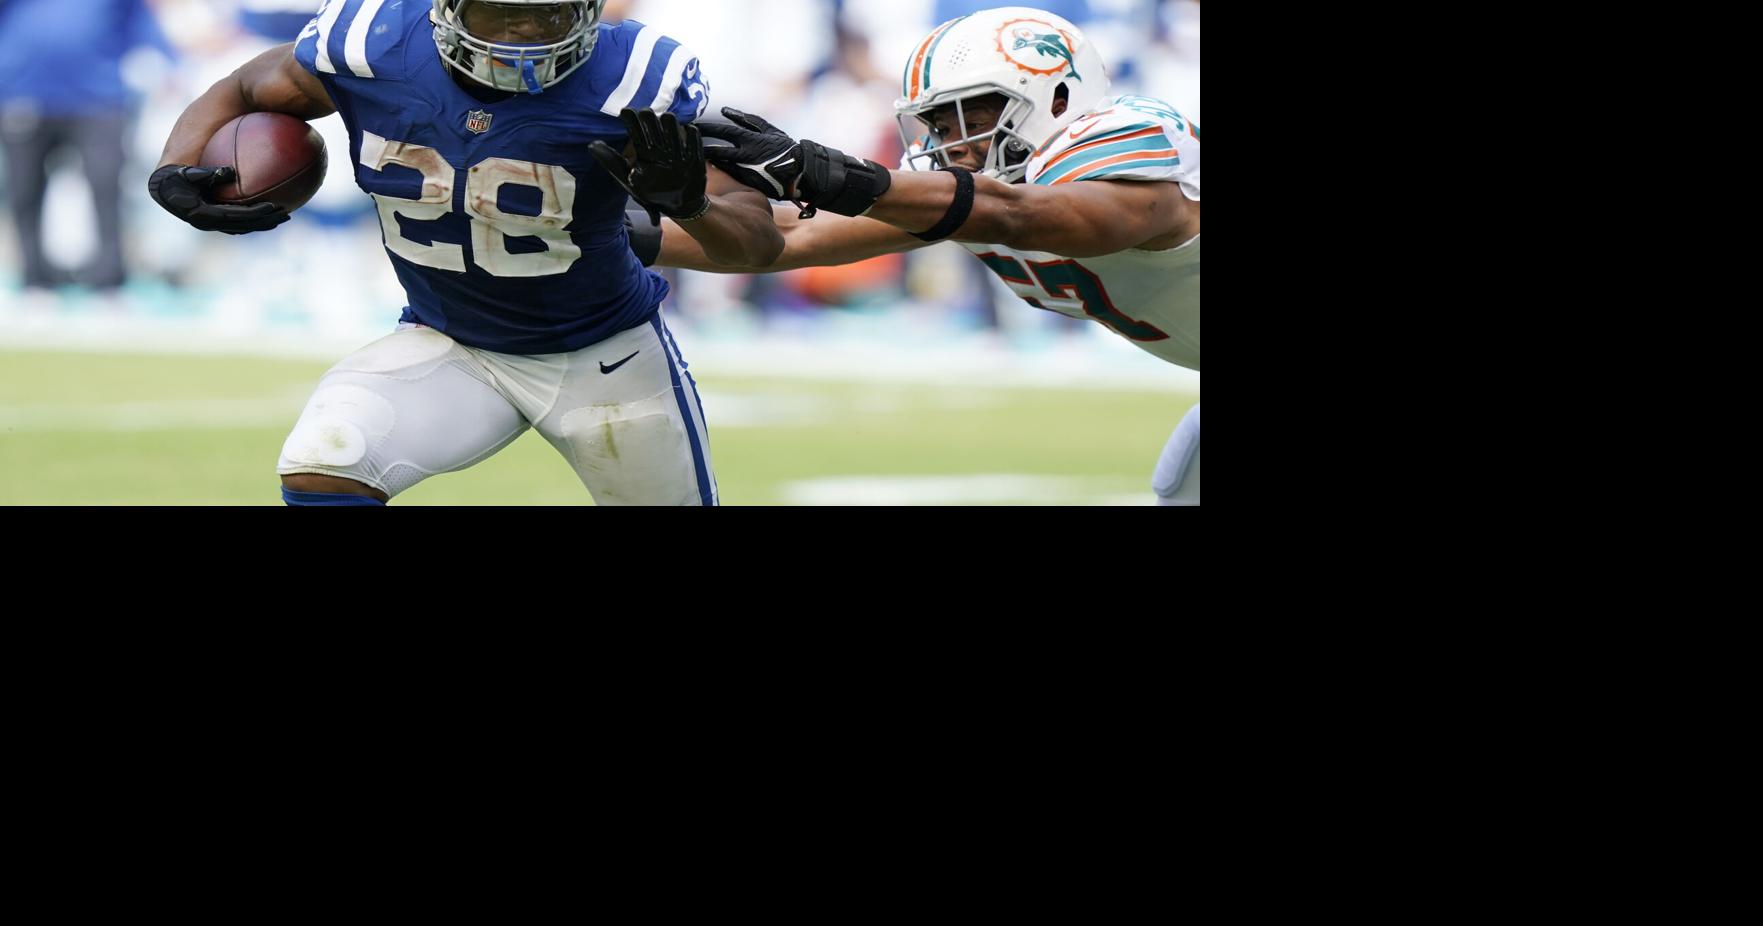 Colts end skid with decisive win against Dolphins